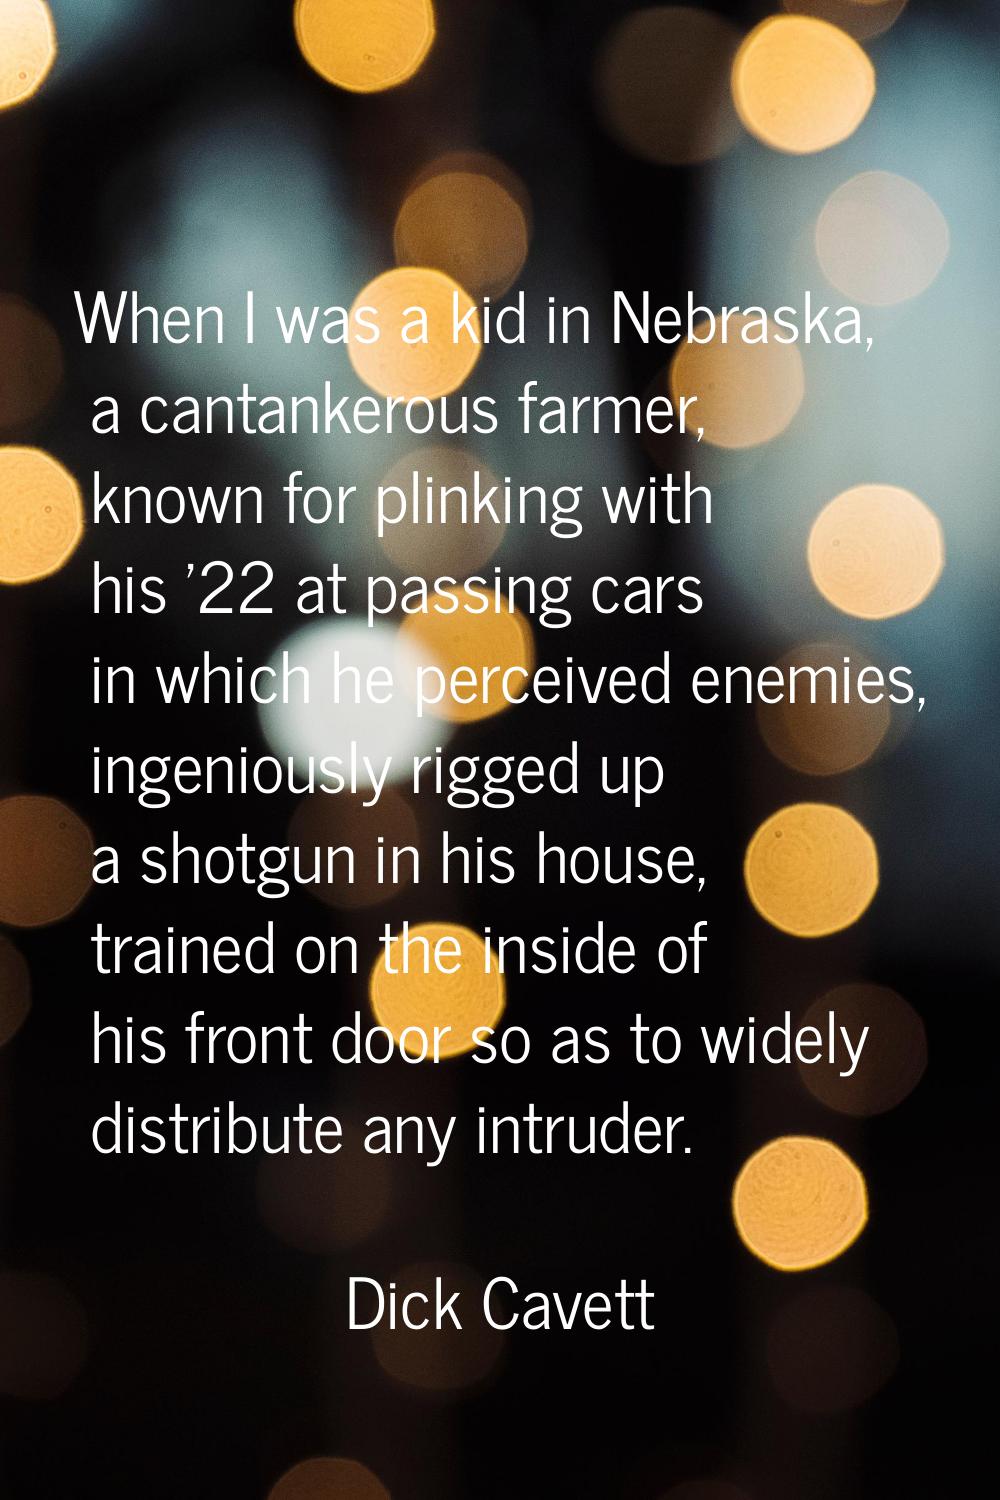 When I was a kid in Nebraska, a cantankerous farmer, known for plinking with his '22 at passing car